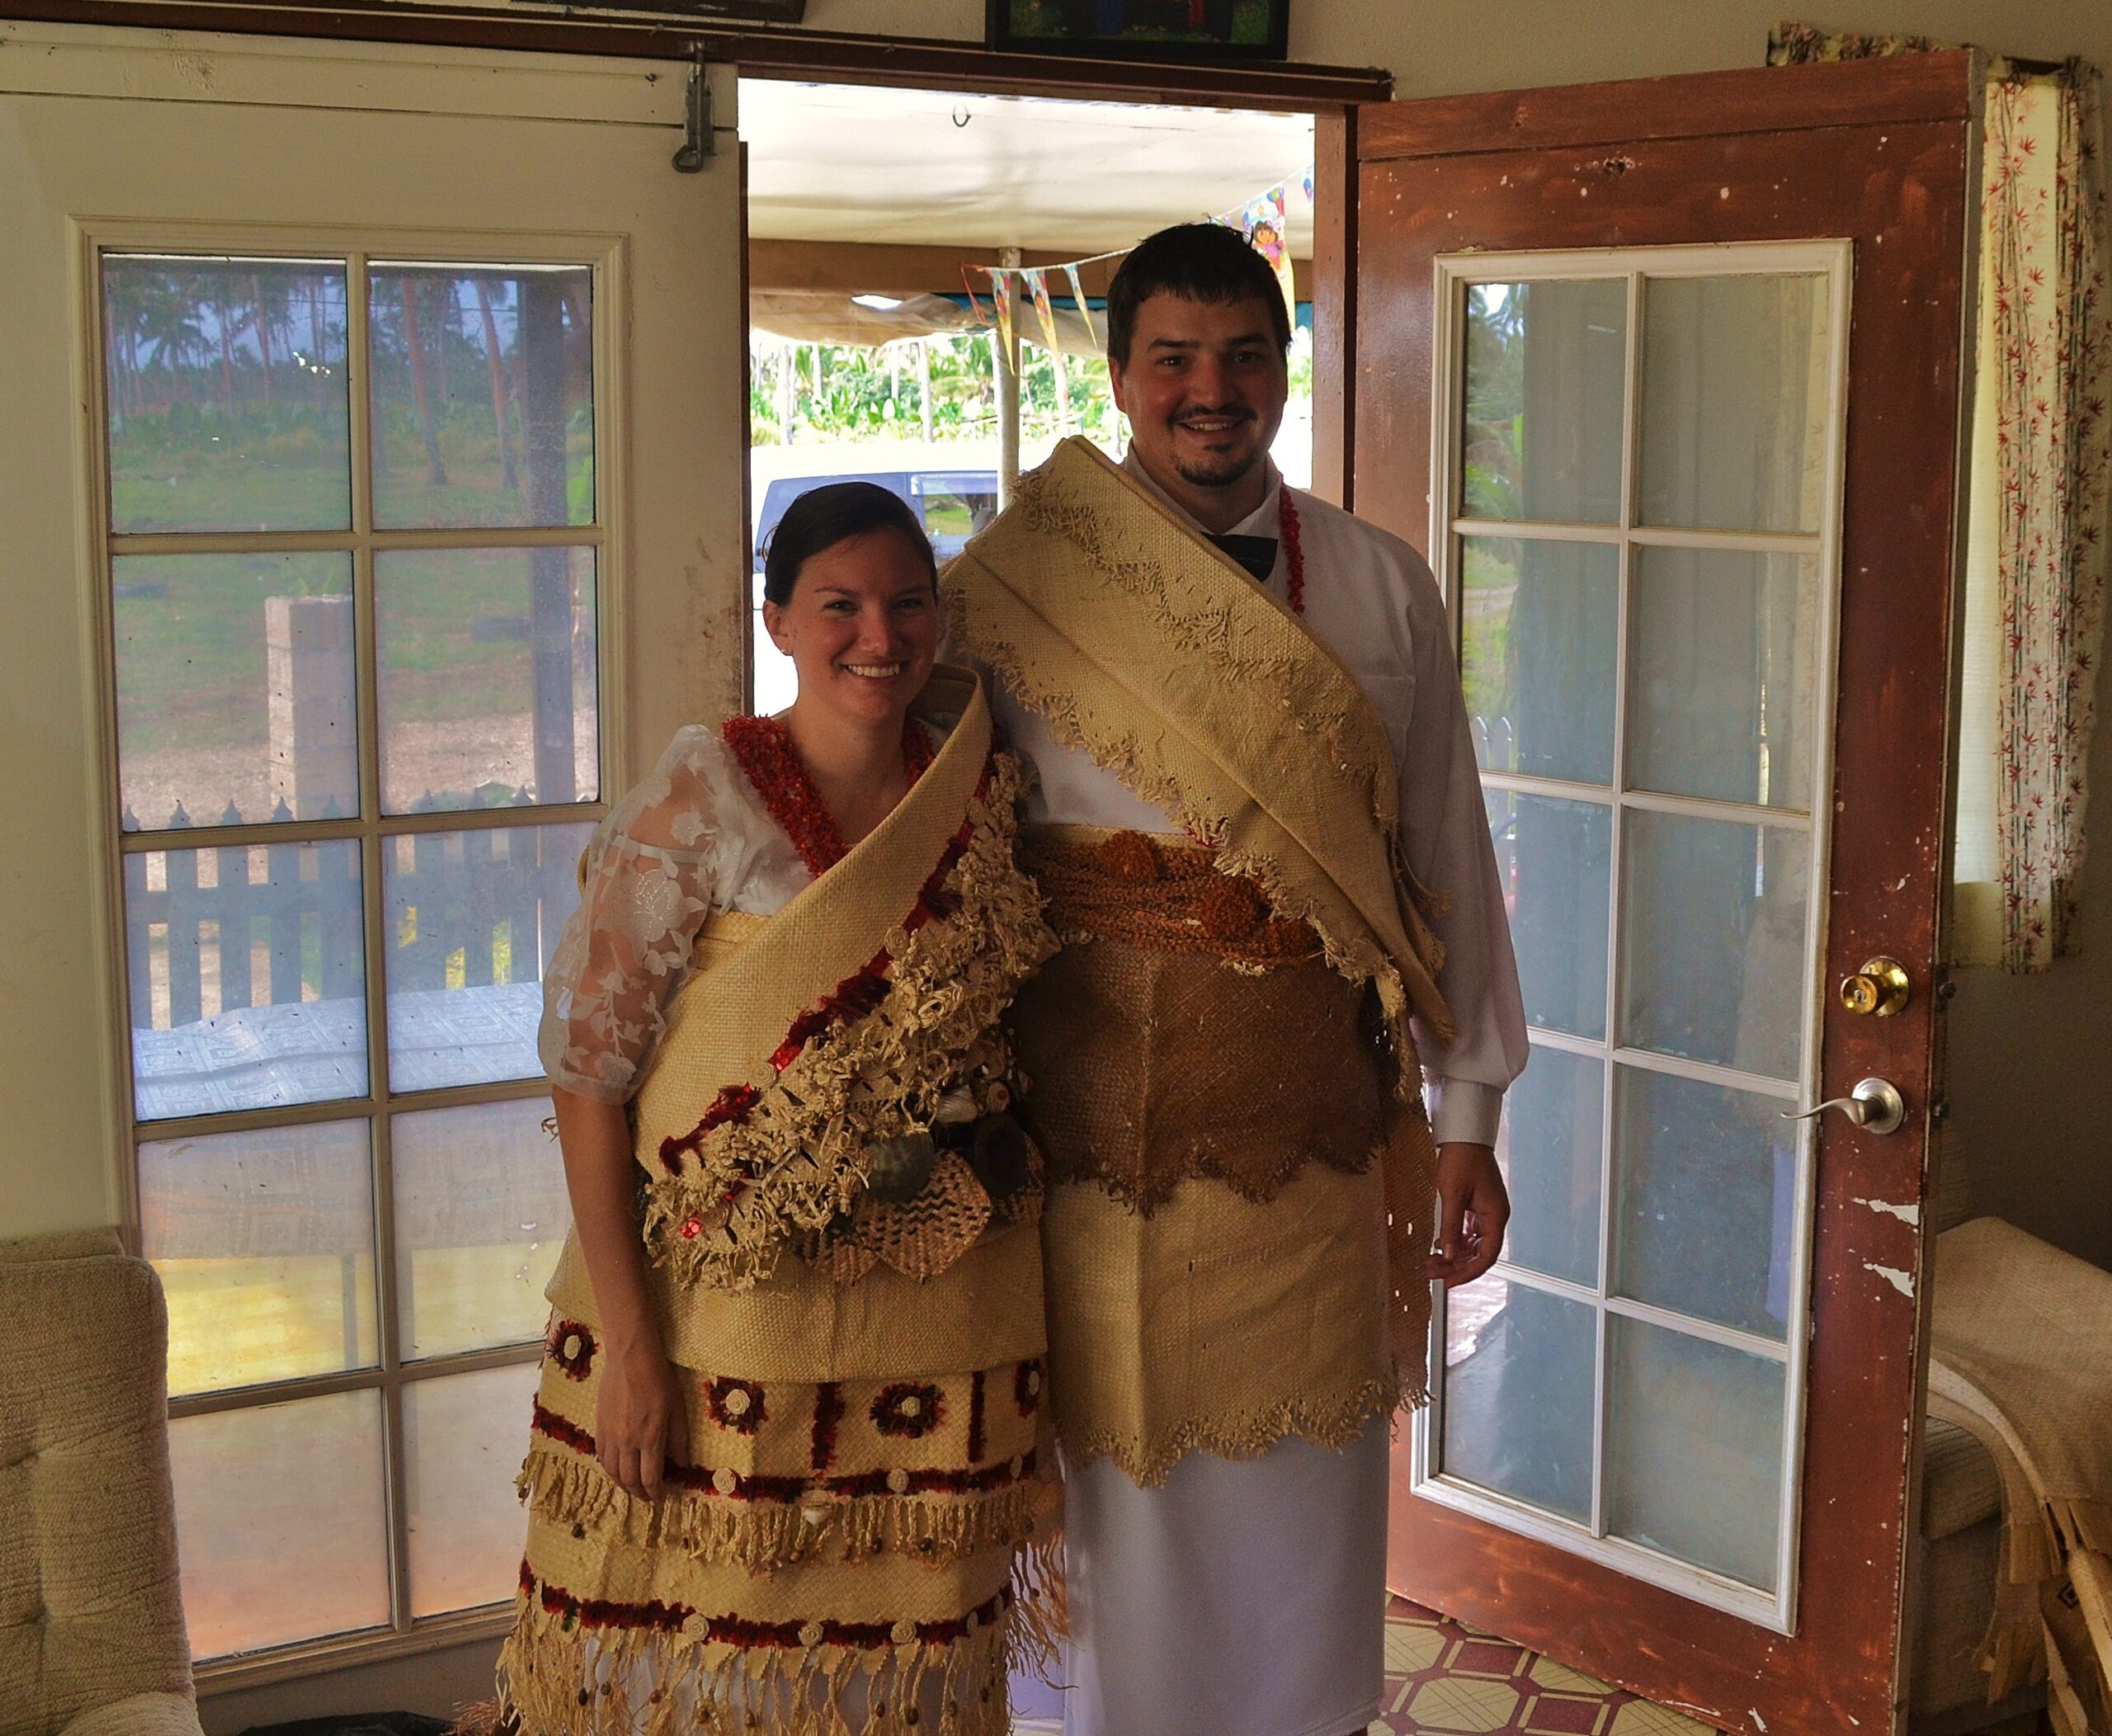 Two people standing side by side wearing traditional Tongan wedding clothes. Peaceworkers.